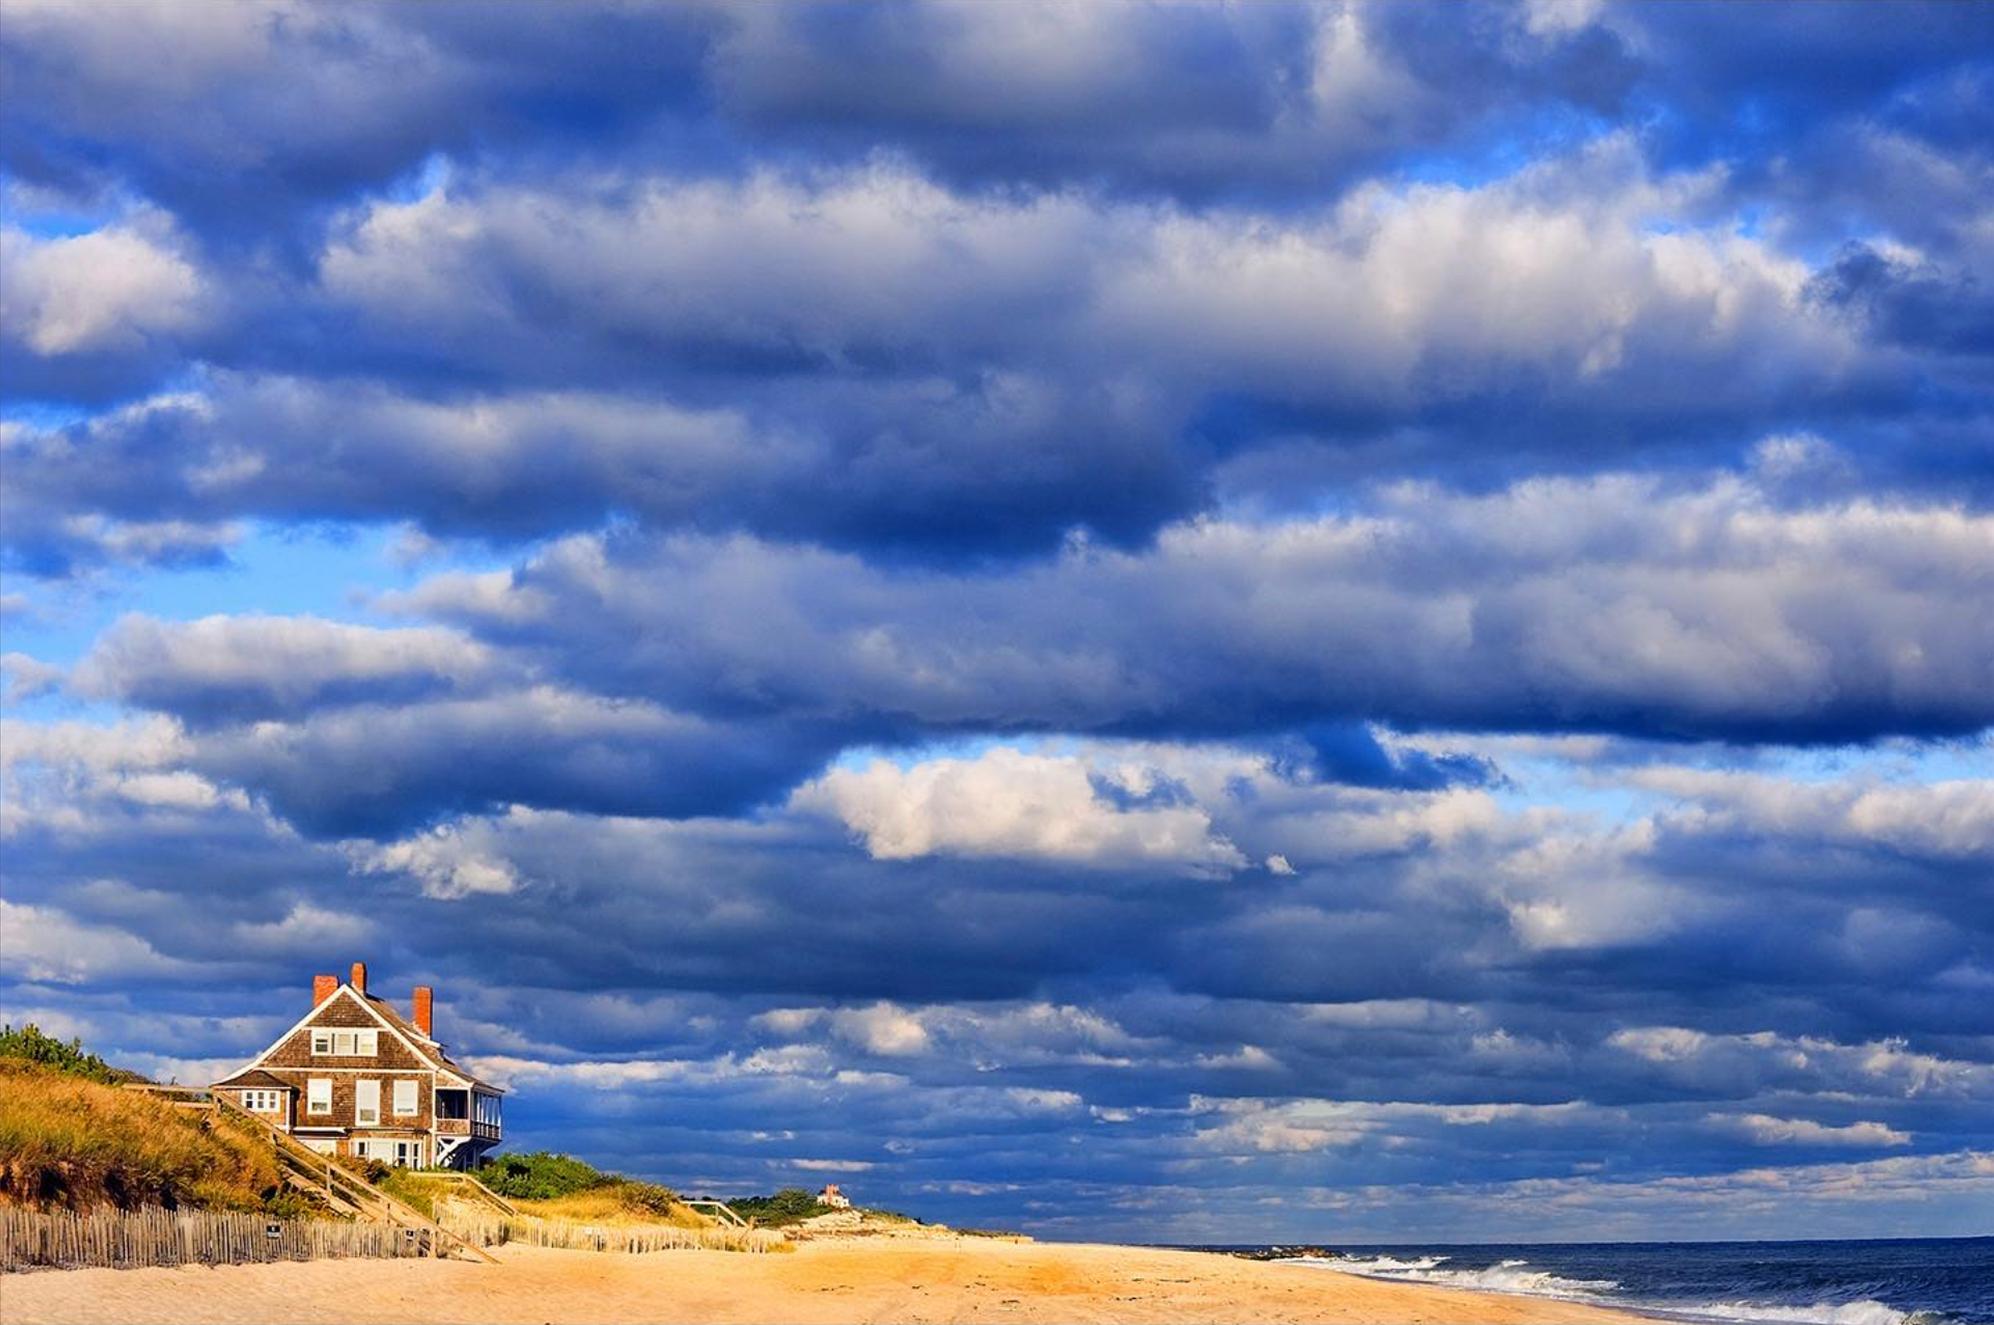 A single house juts out into a vast sky and sea of Long Island.  The image takes inspiration from the epic 19th-century paintings and the American West with vast unending sky and untamed landscapes.  Yet the composition is quite radical and